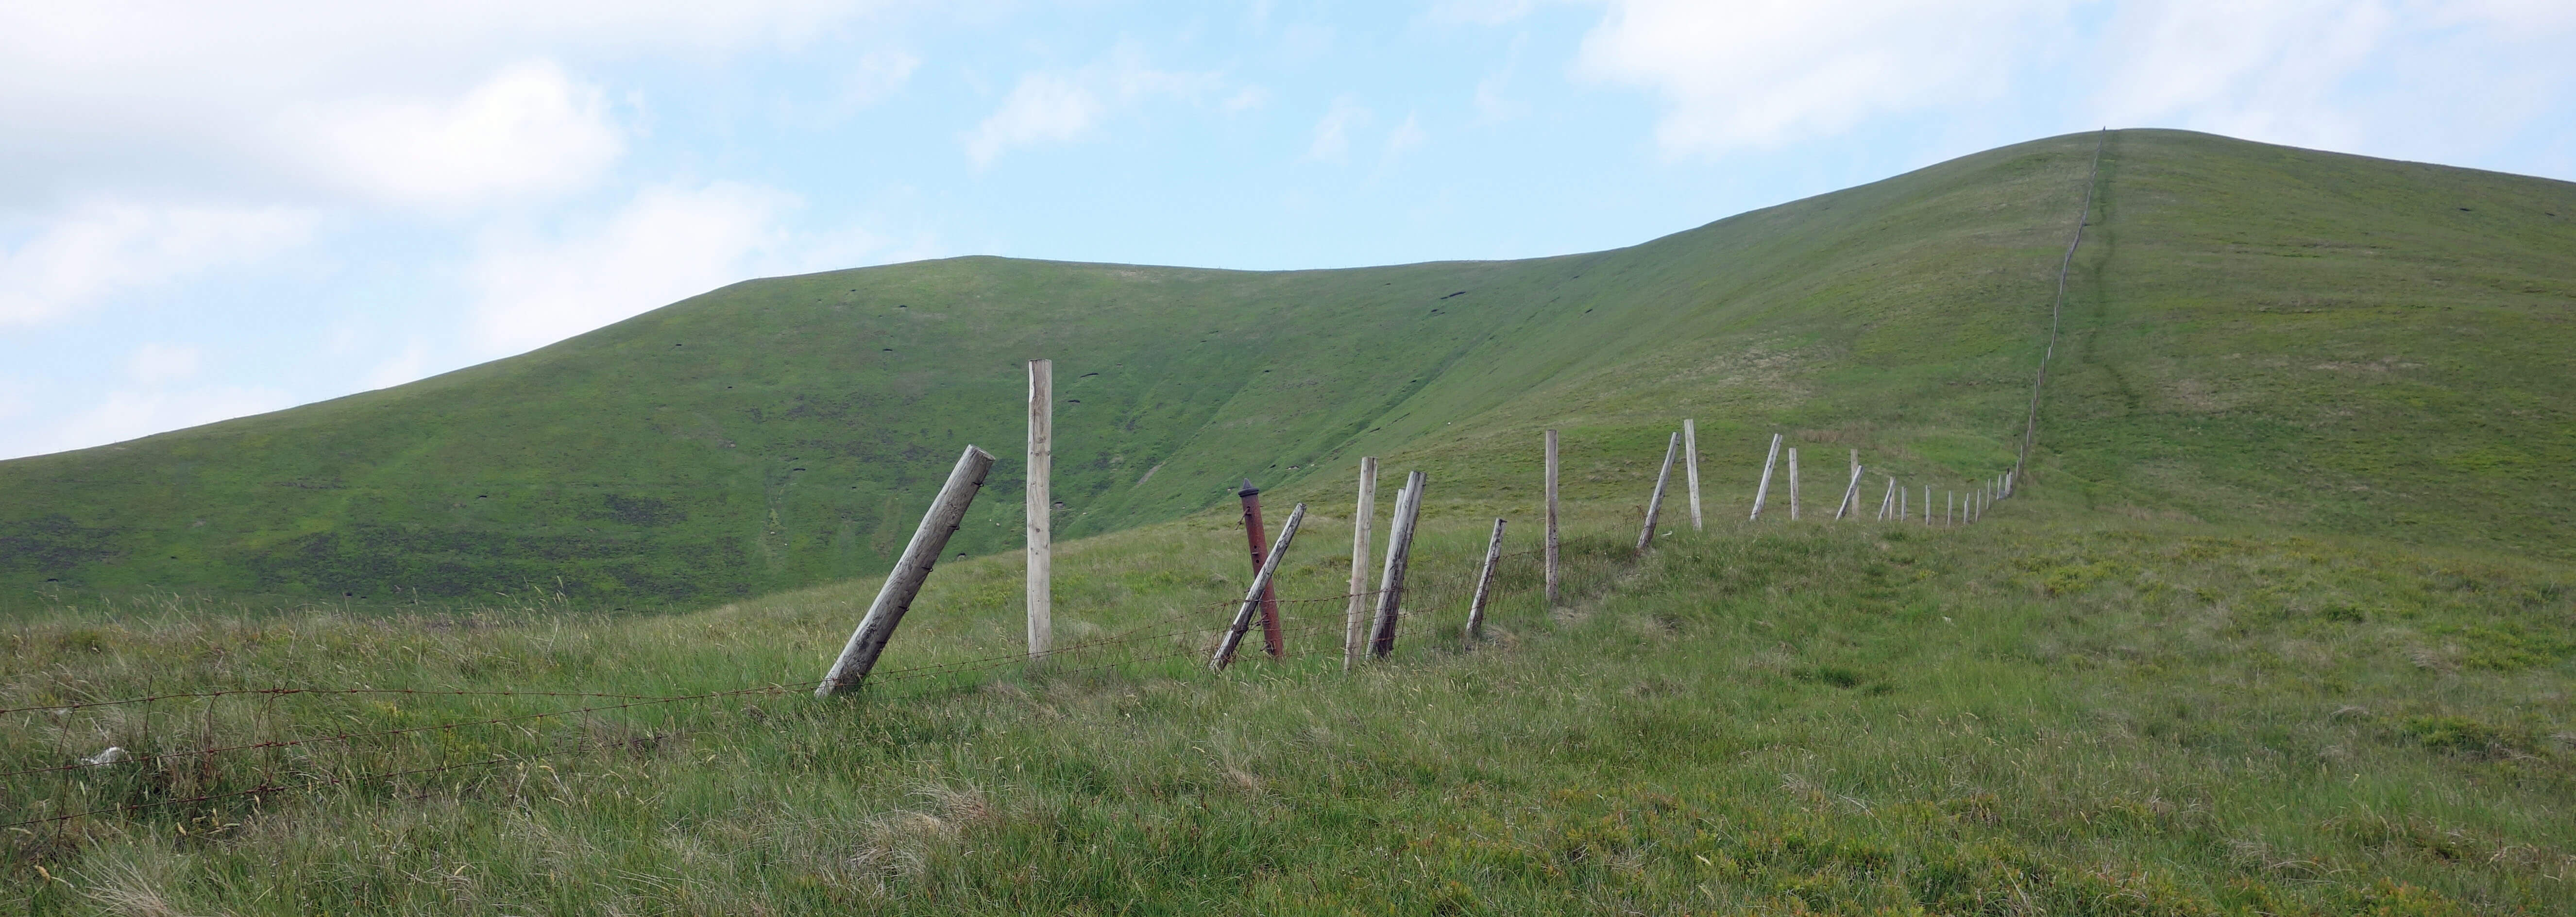 The Hobdale fence